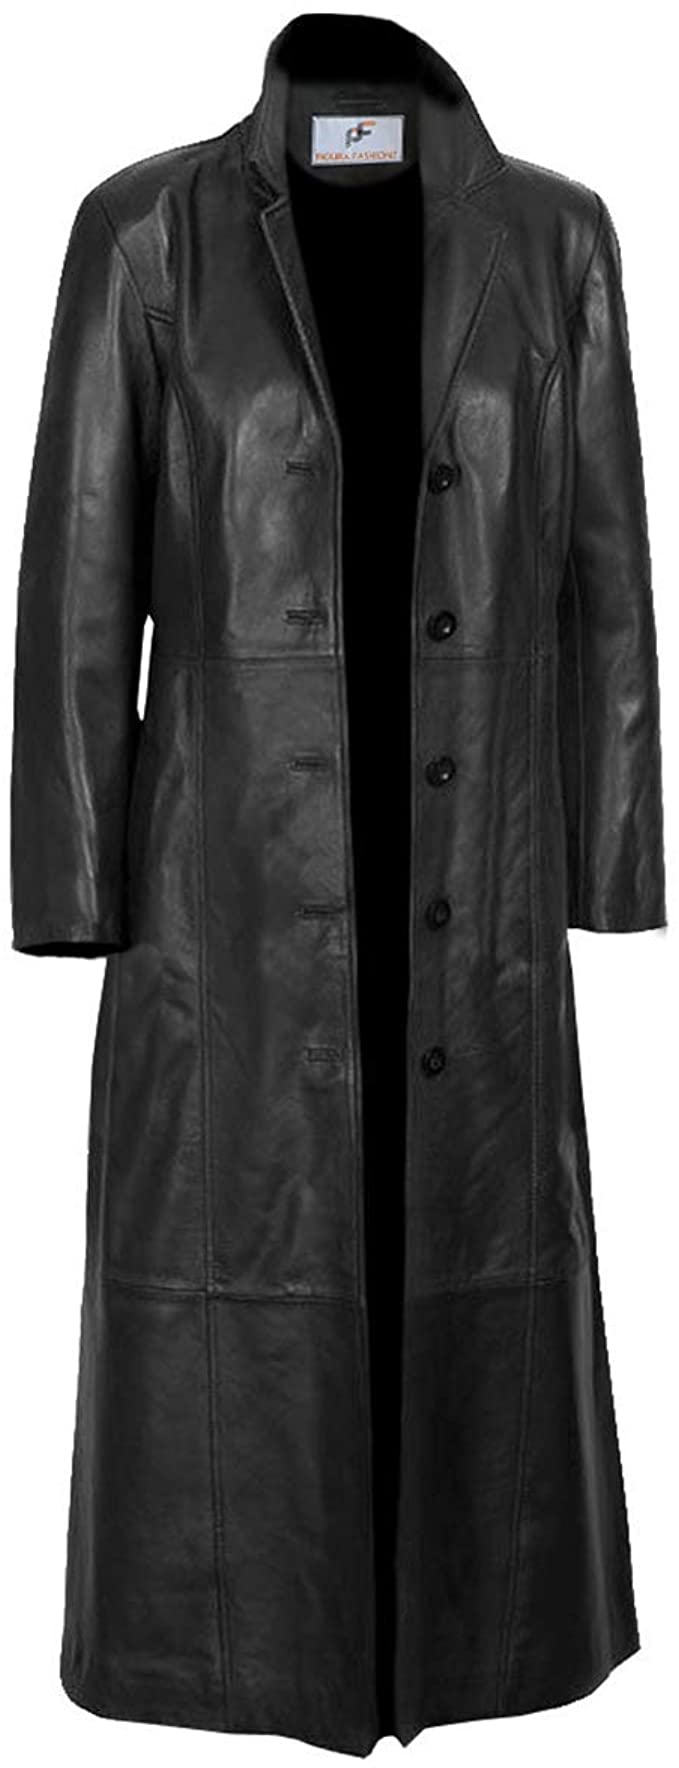 Unisex Genuine Sheep Leather Long Coat (Free Home Delivery Within 7 To 10 Days Worldwide)